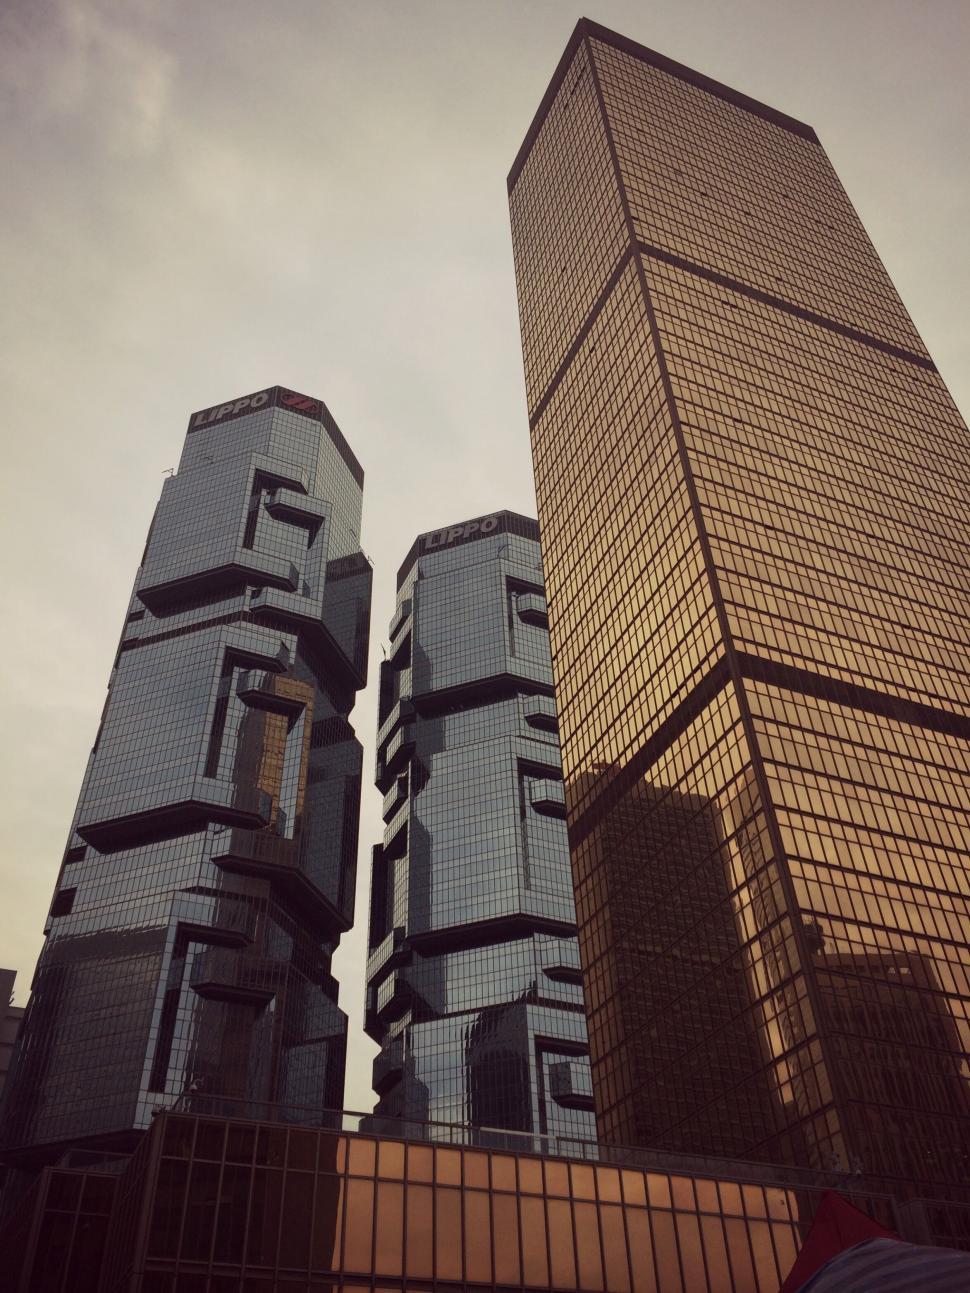 Free Image of Modern skyscrapers with reflective surfaces 